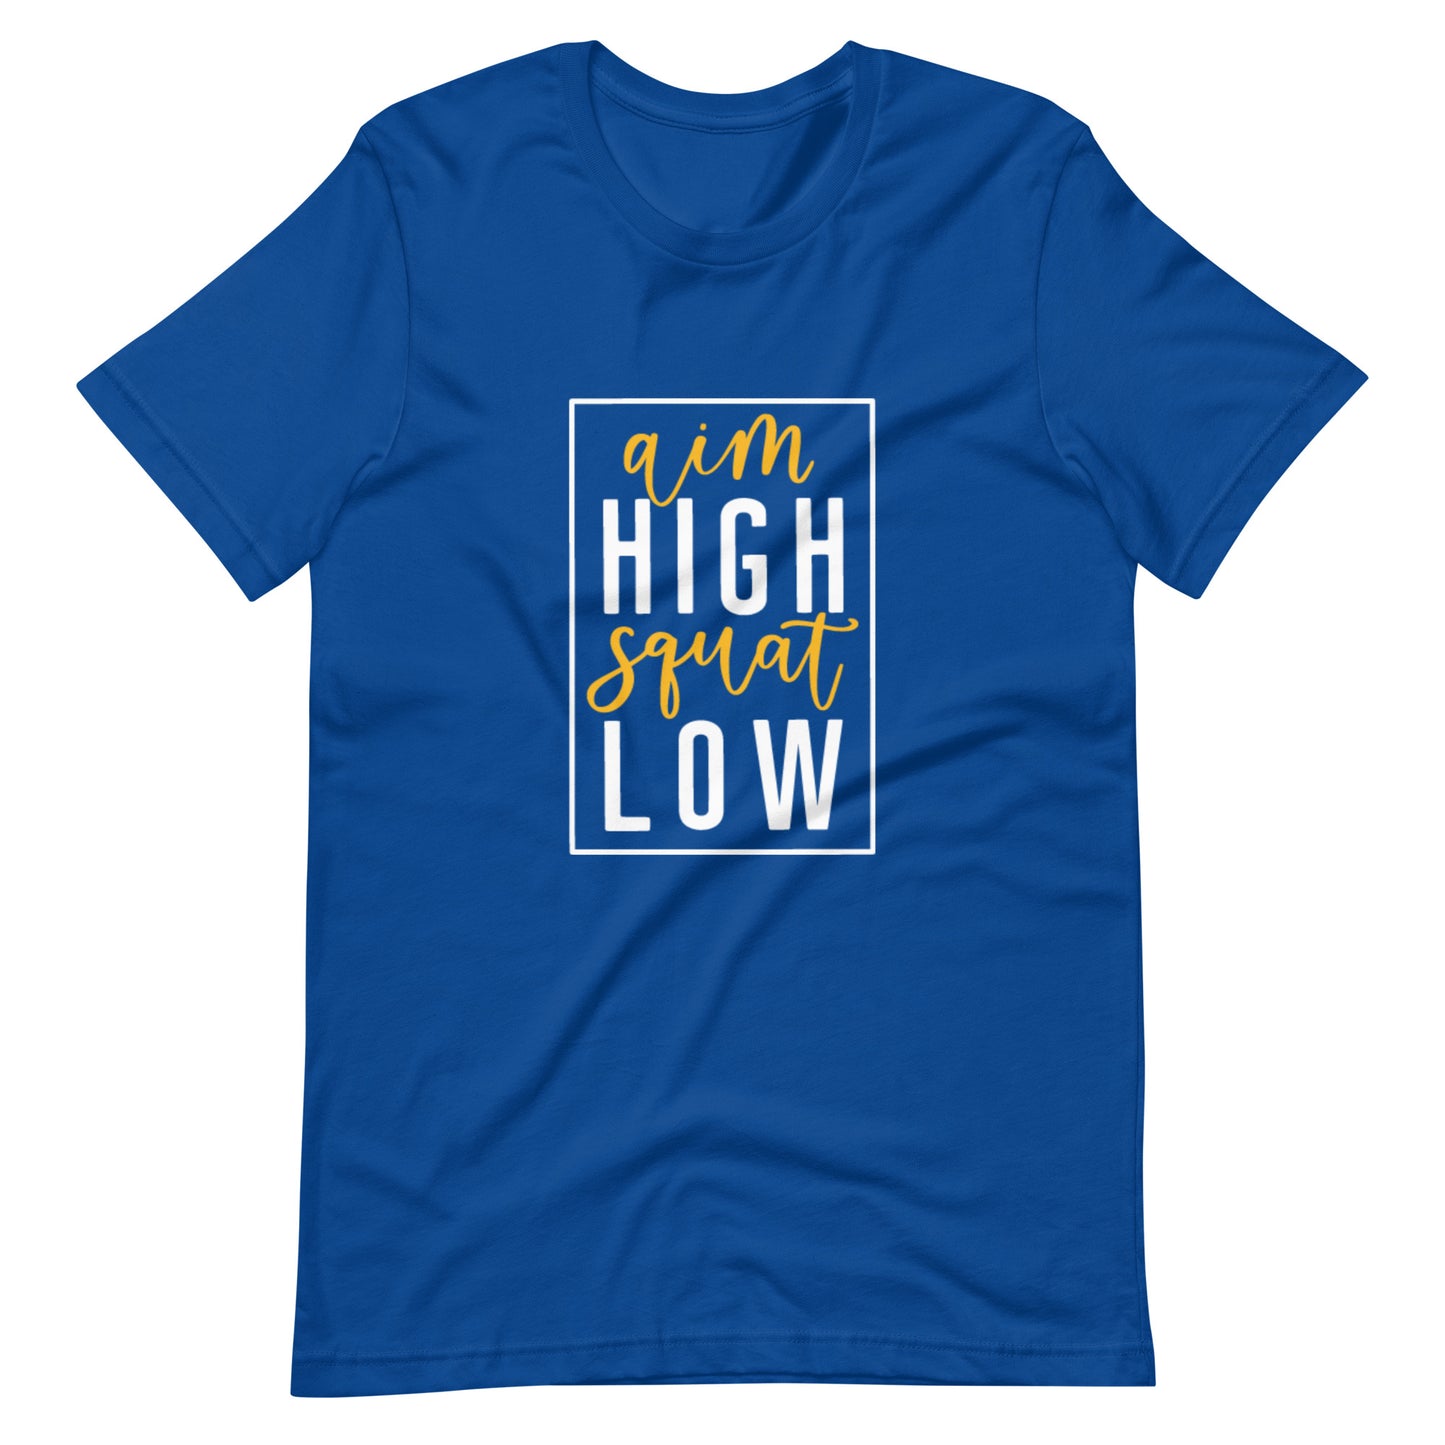 Aim high squat low Unisex Tee The Workout Inspiration